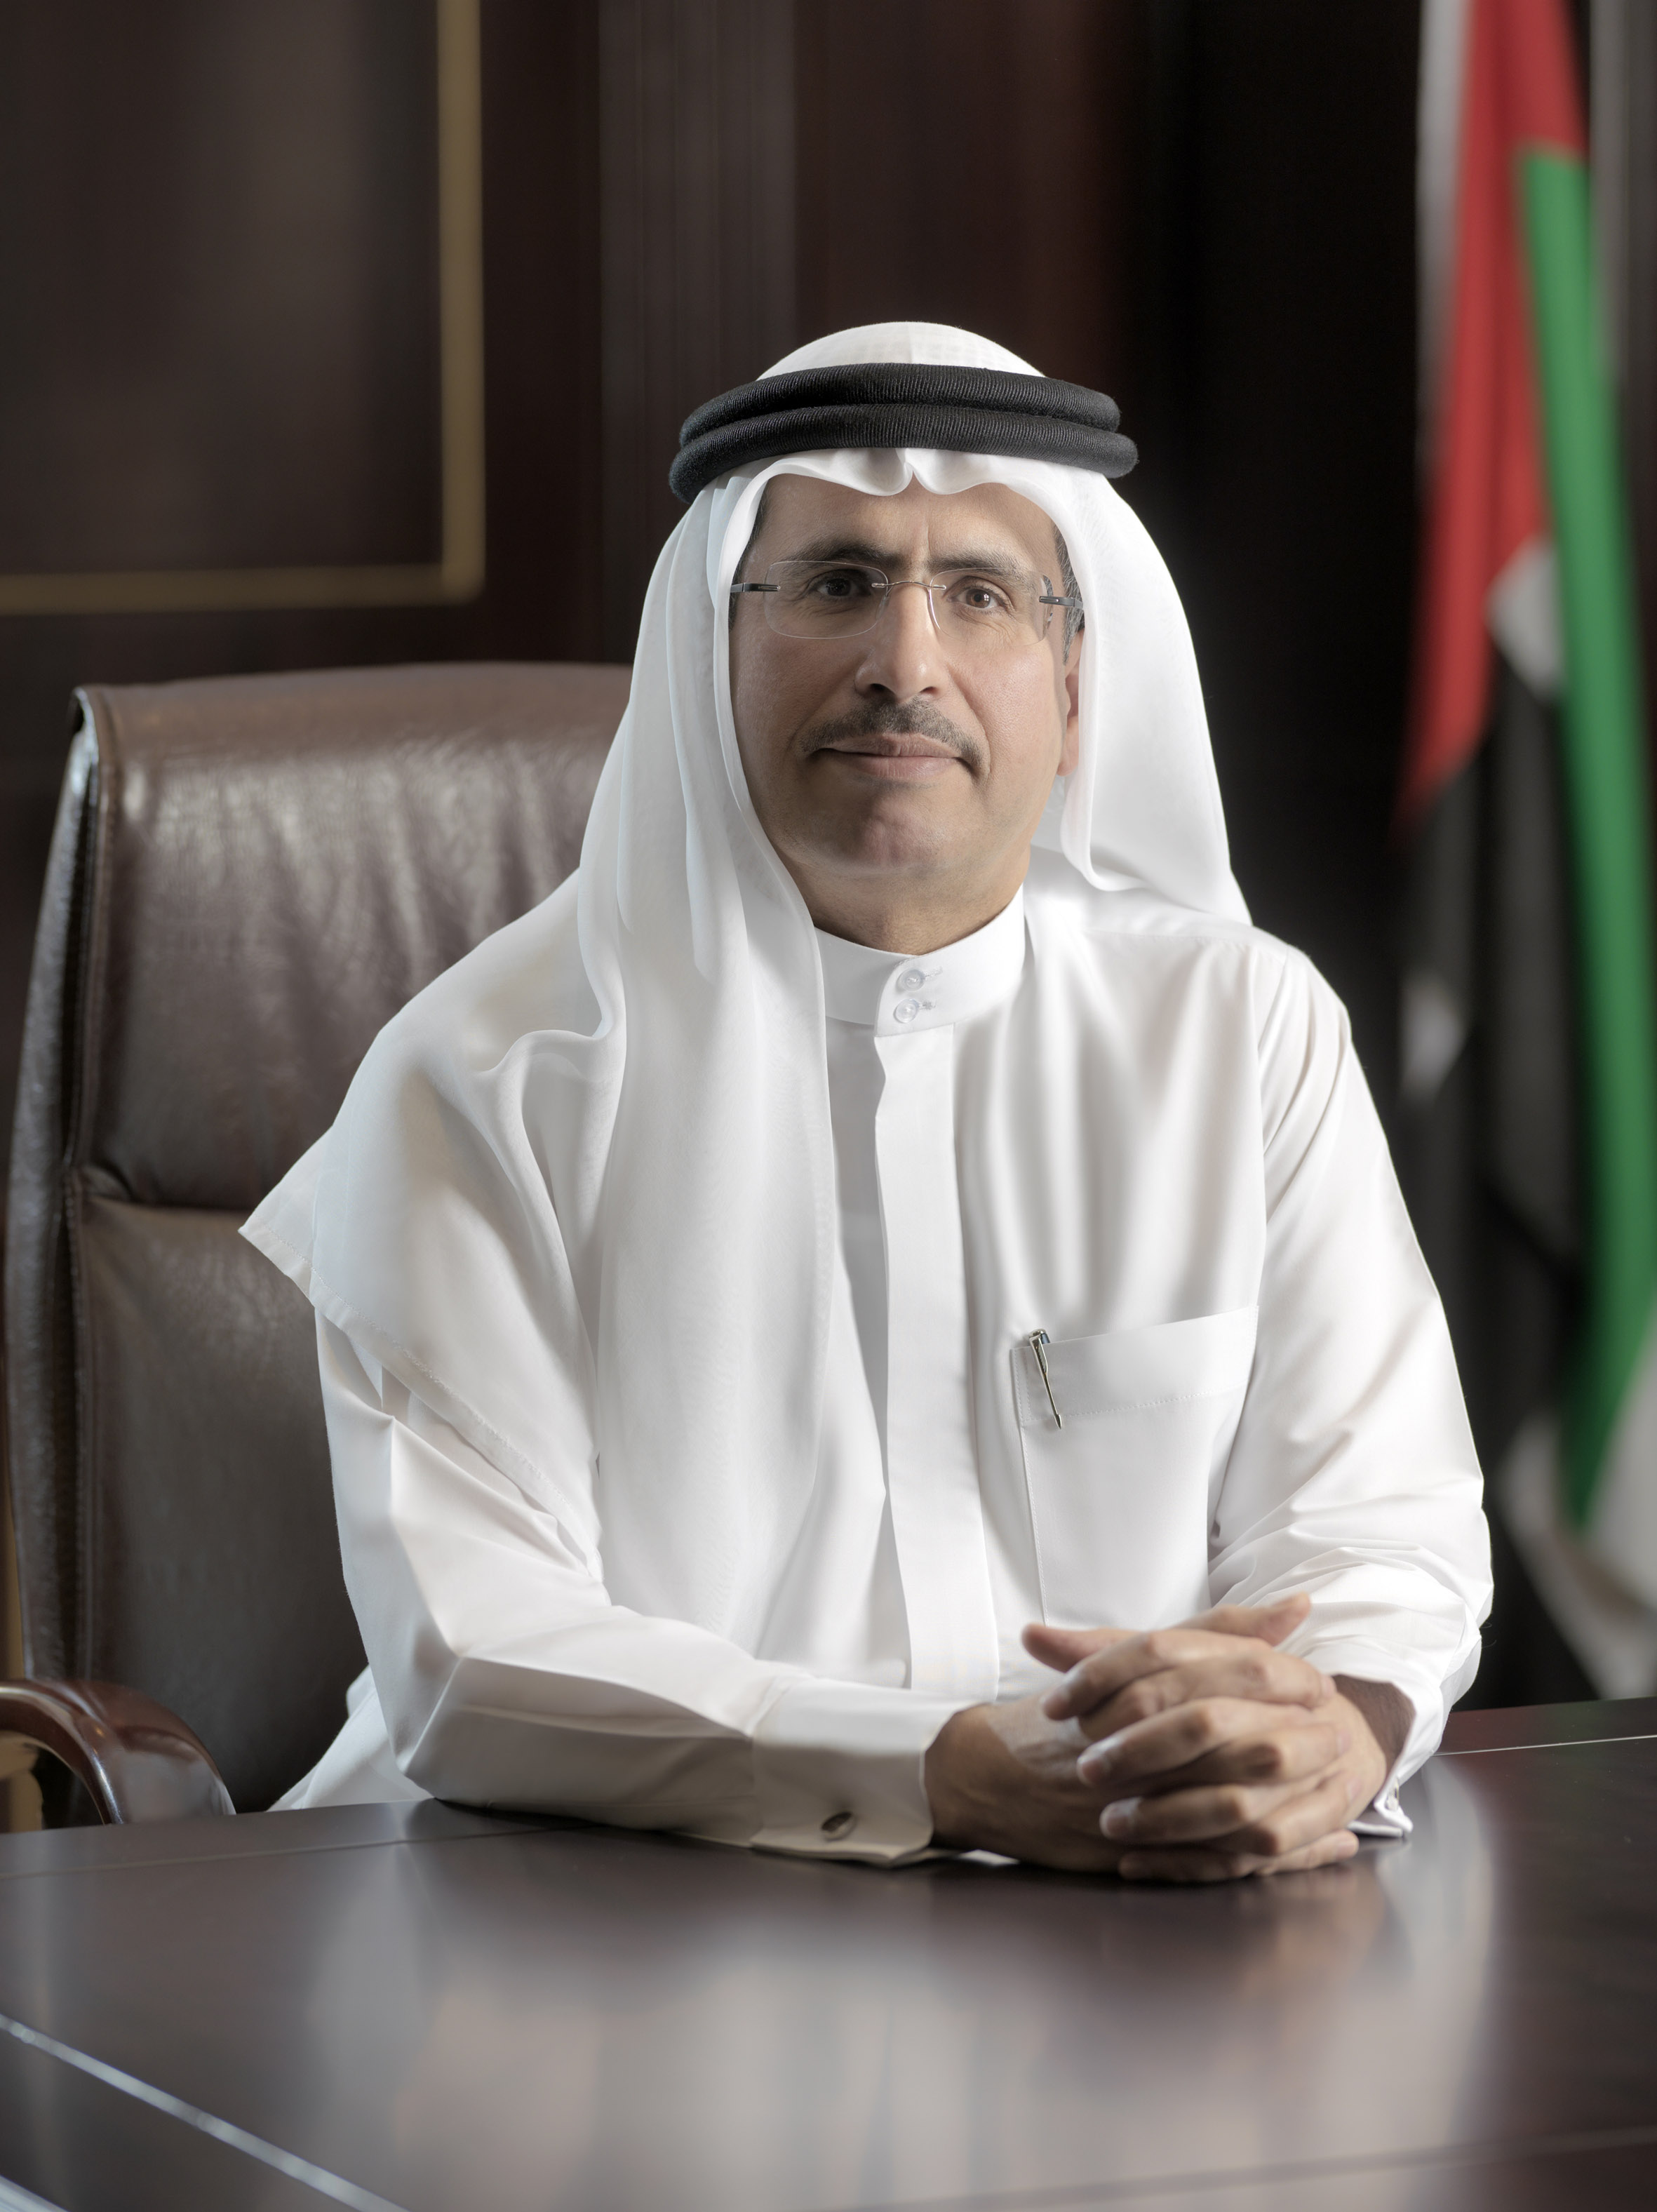 On Earth Day, DEWA urges society members to protect the environment and natural resources